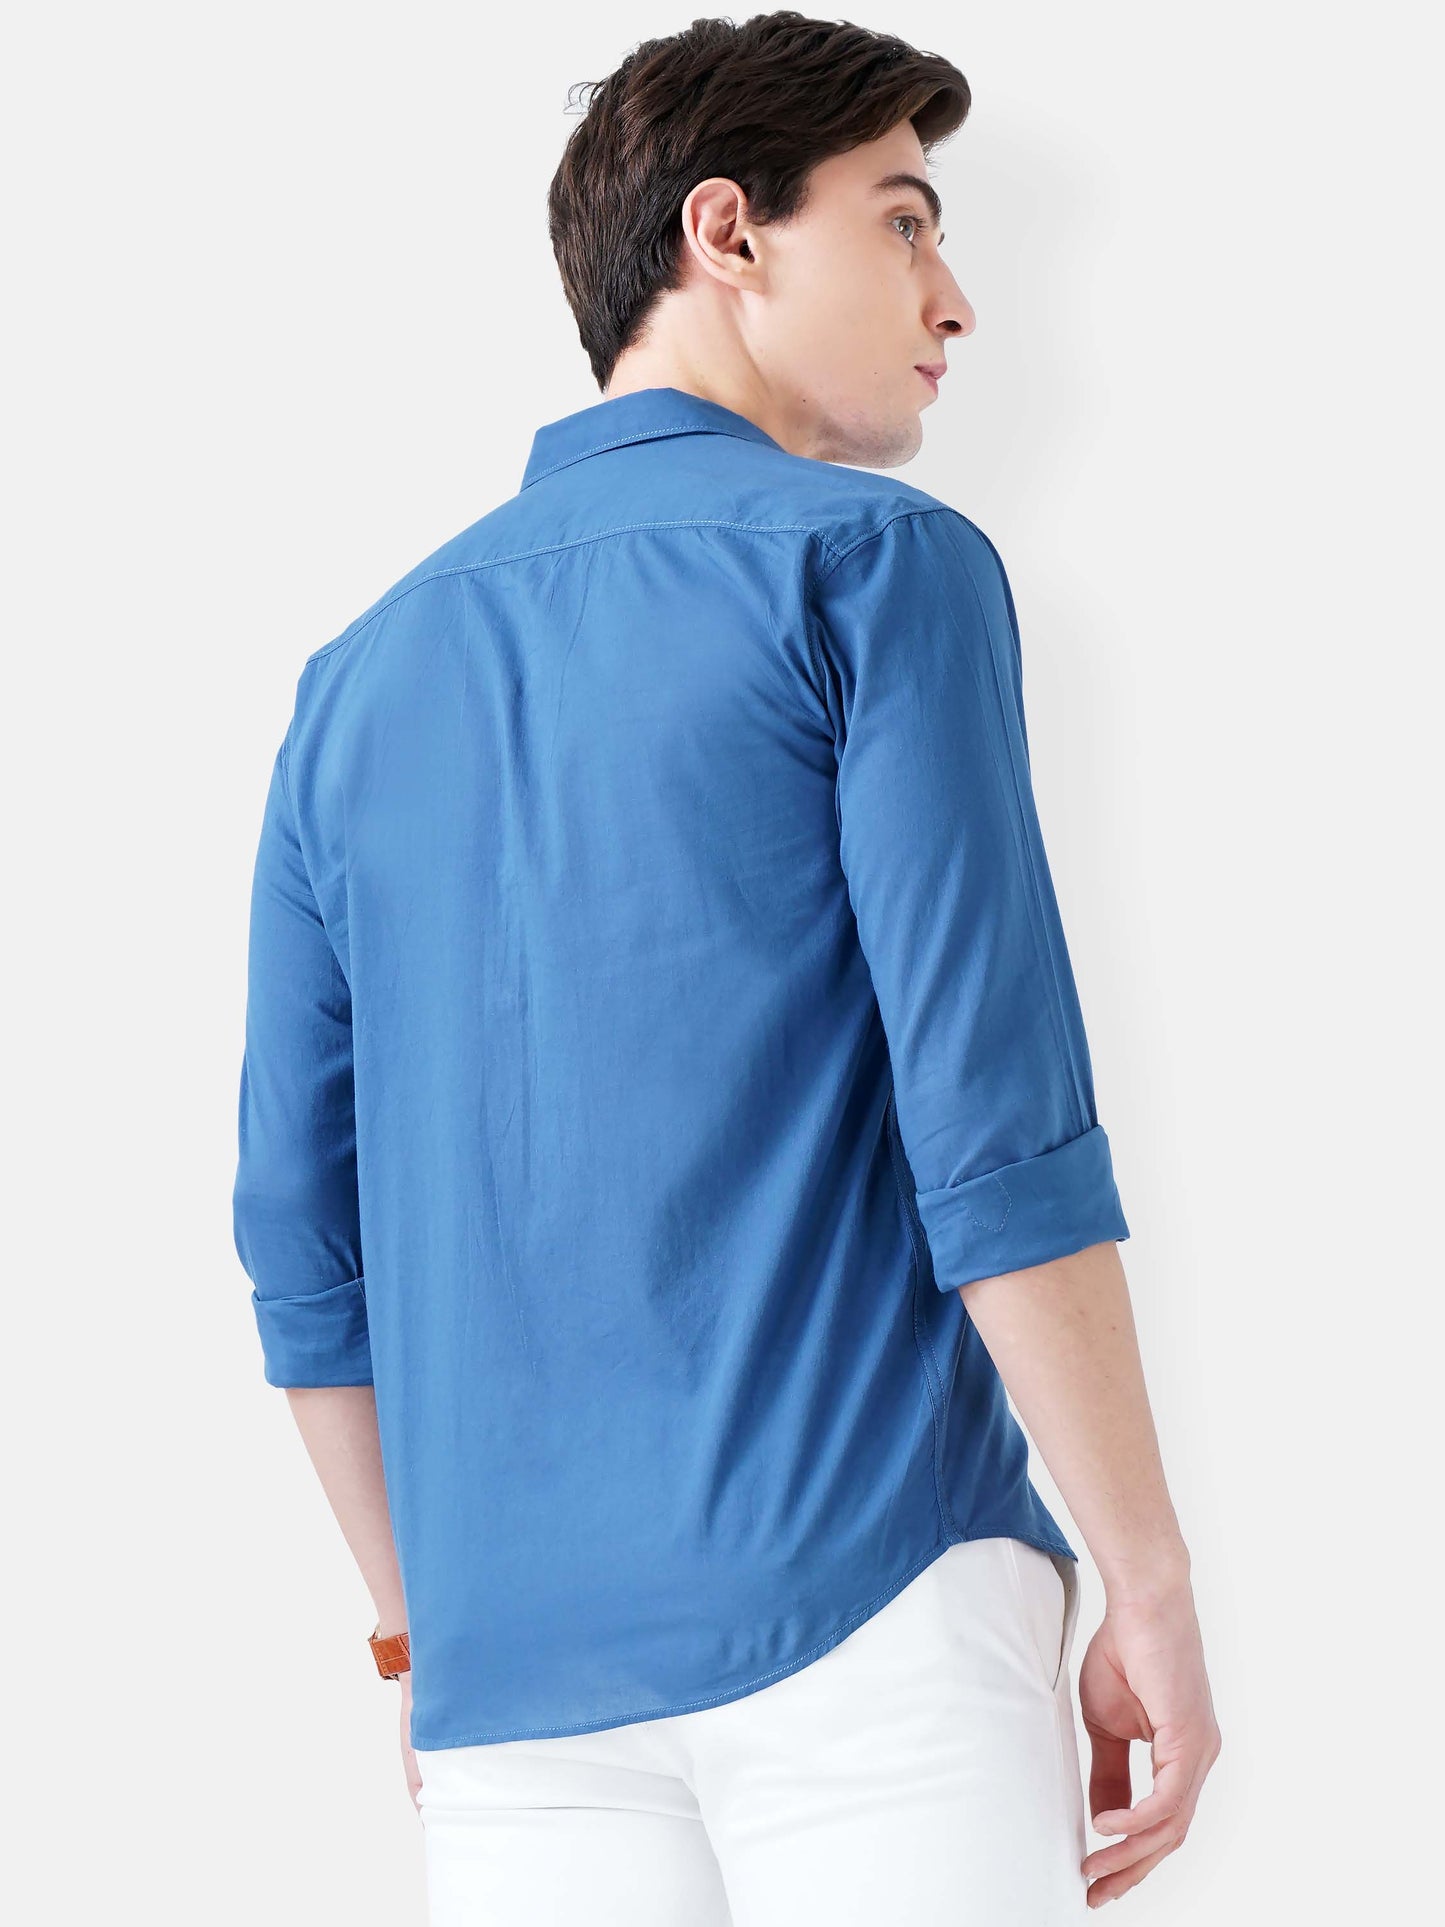 Cool Blue Solid Shirt